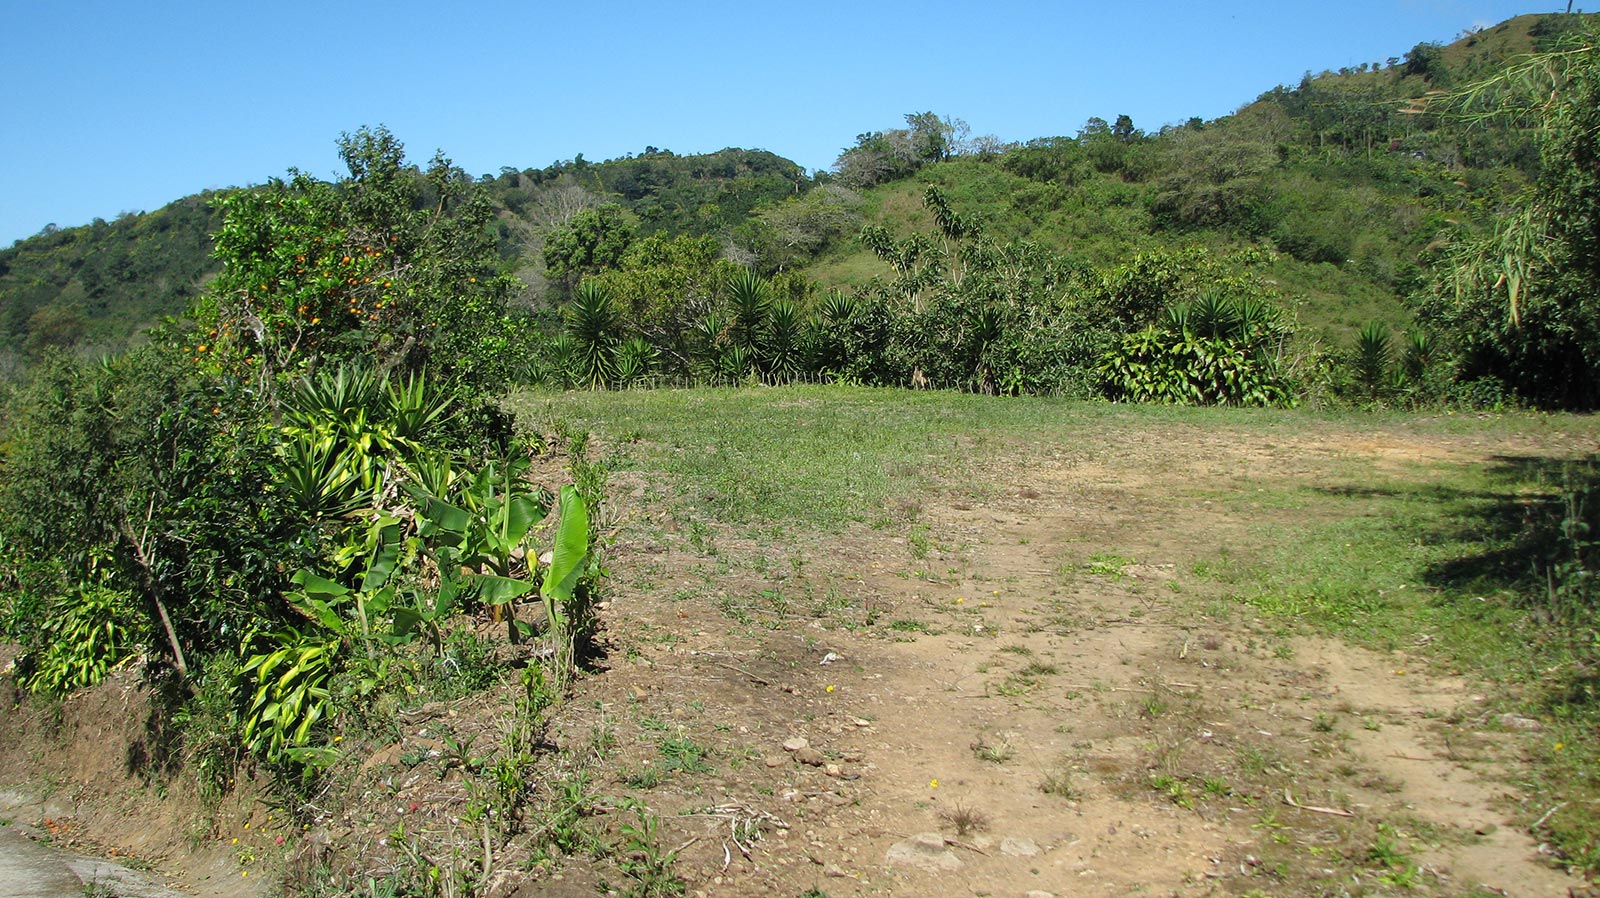 hectares,property,specialty, coffee plantation,plants,lots,located,mountains